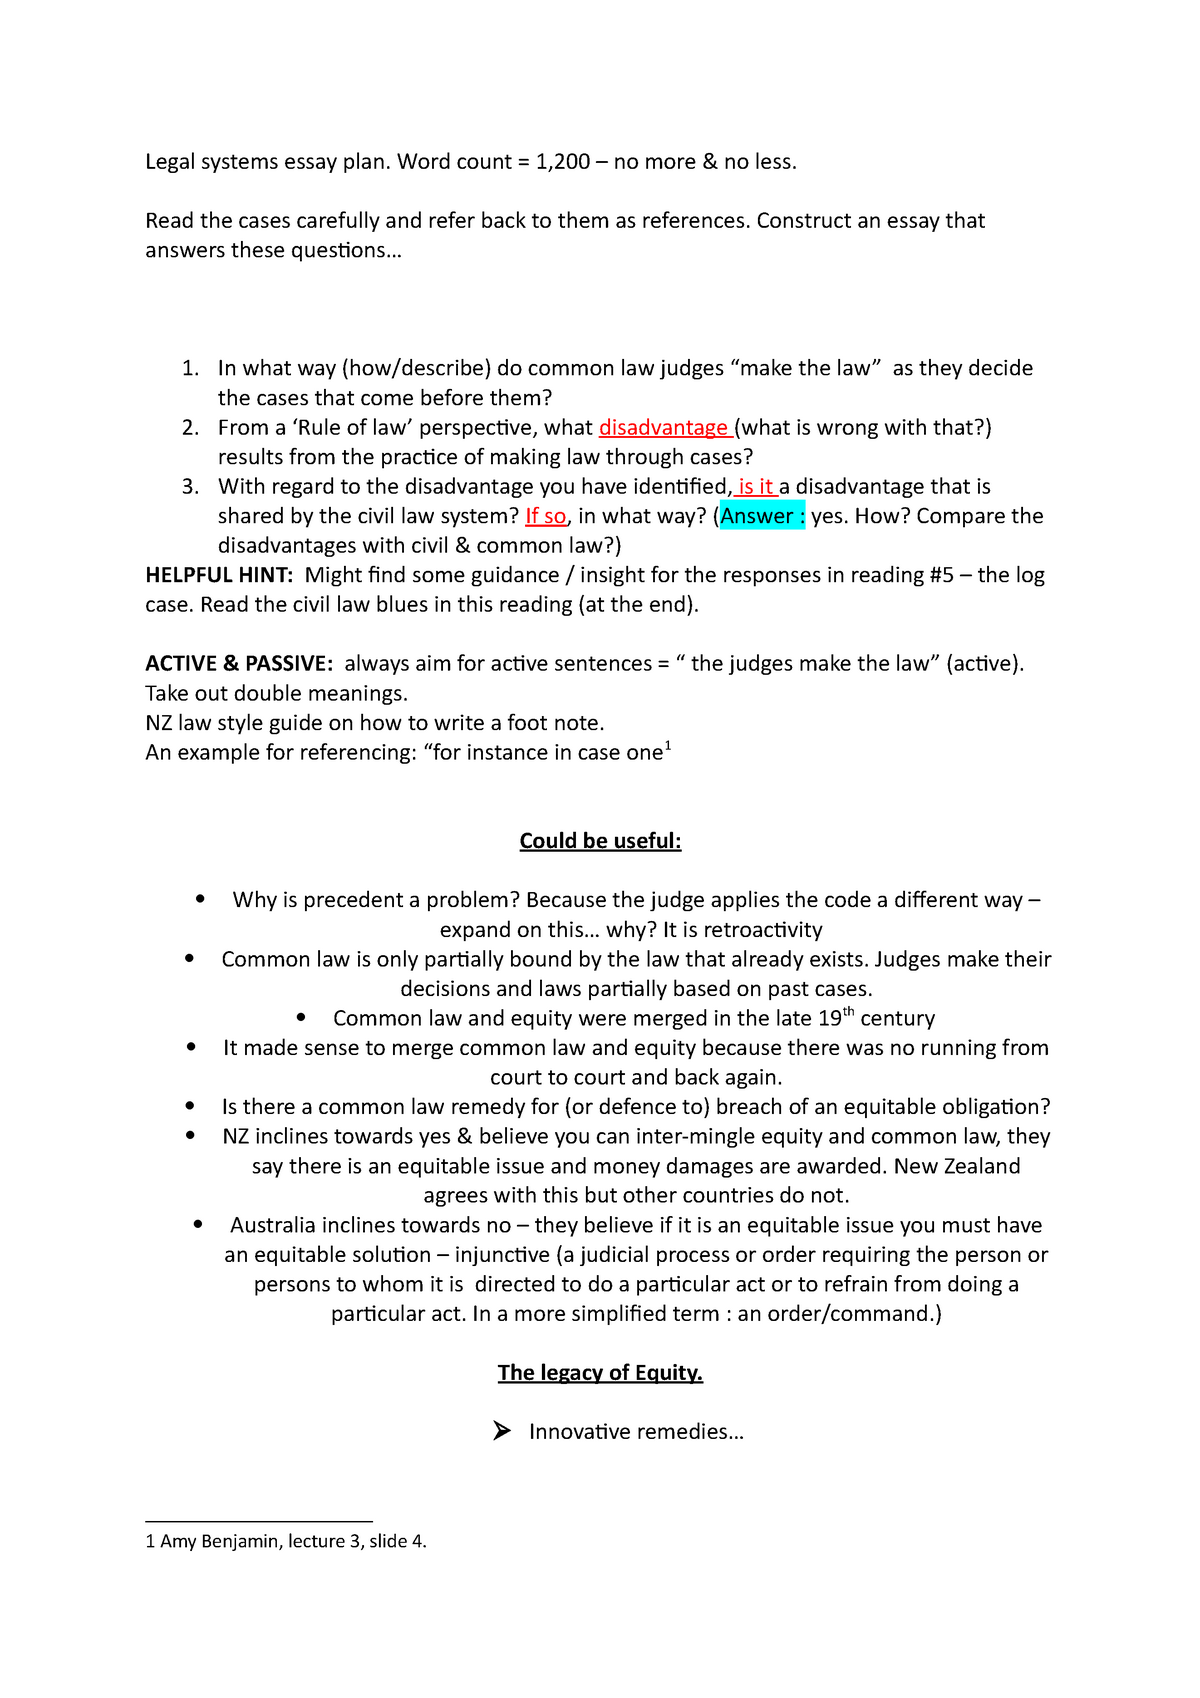 Legal systems essay help - Legal systems essay plan. Word count